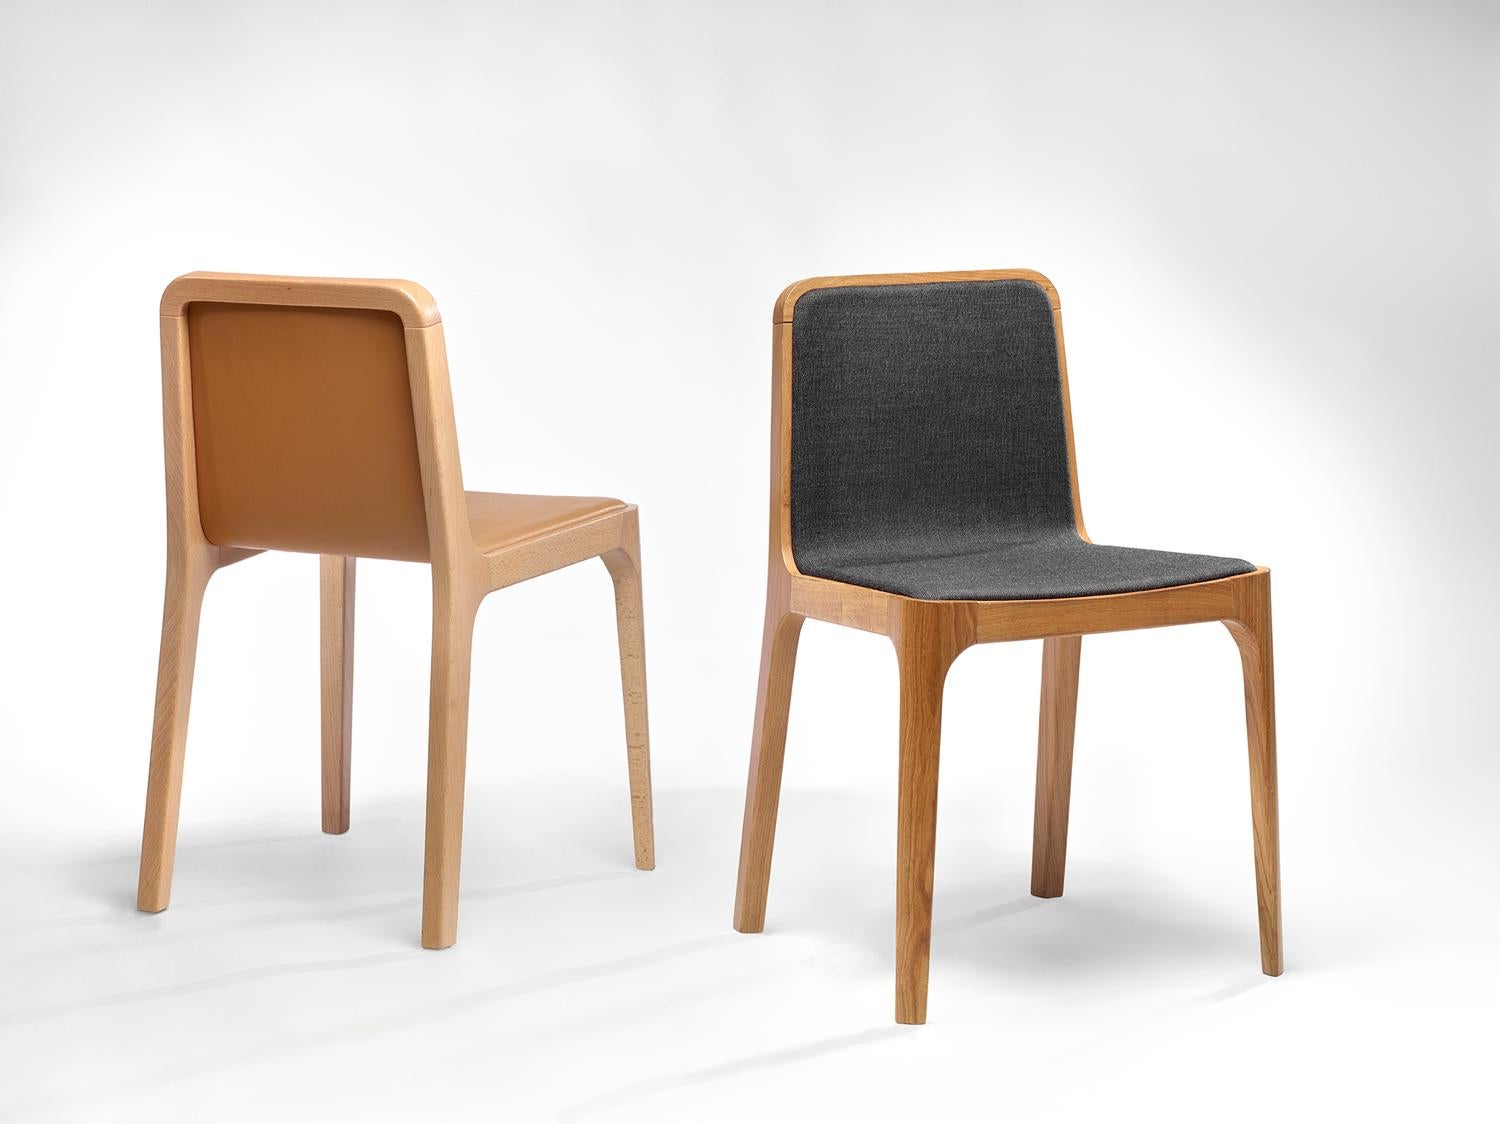 Minimalist Modern Chair in Ash Wood Fabric Upholstery In New Condition For Sale In Lisbon, PT